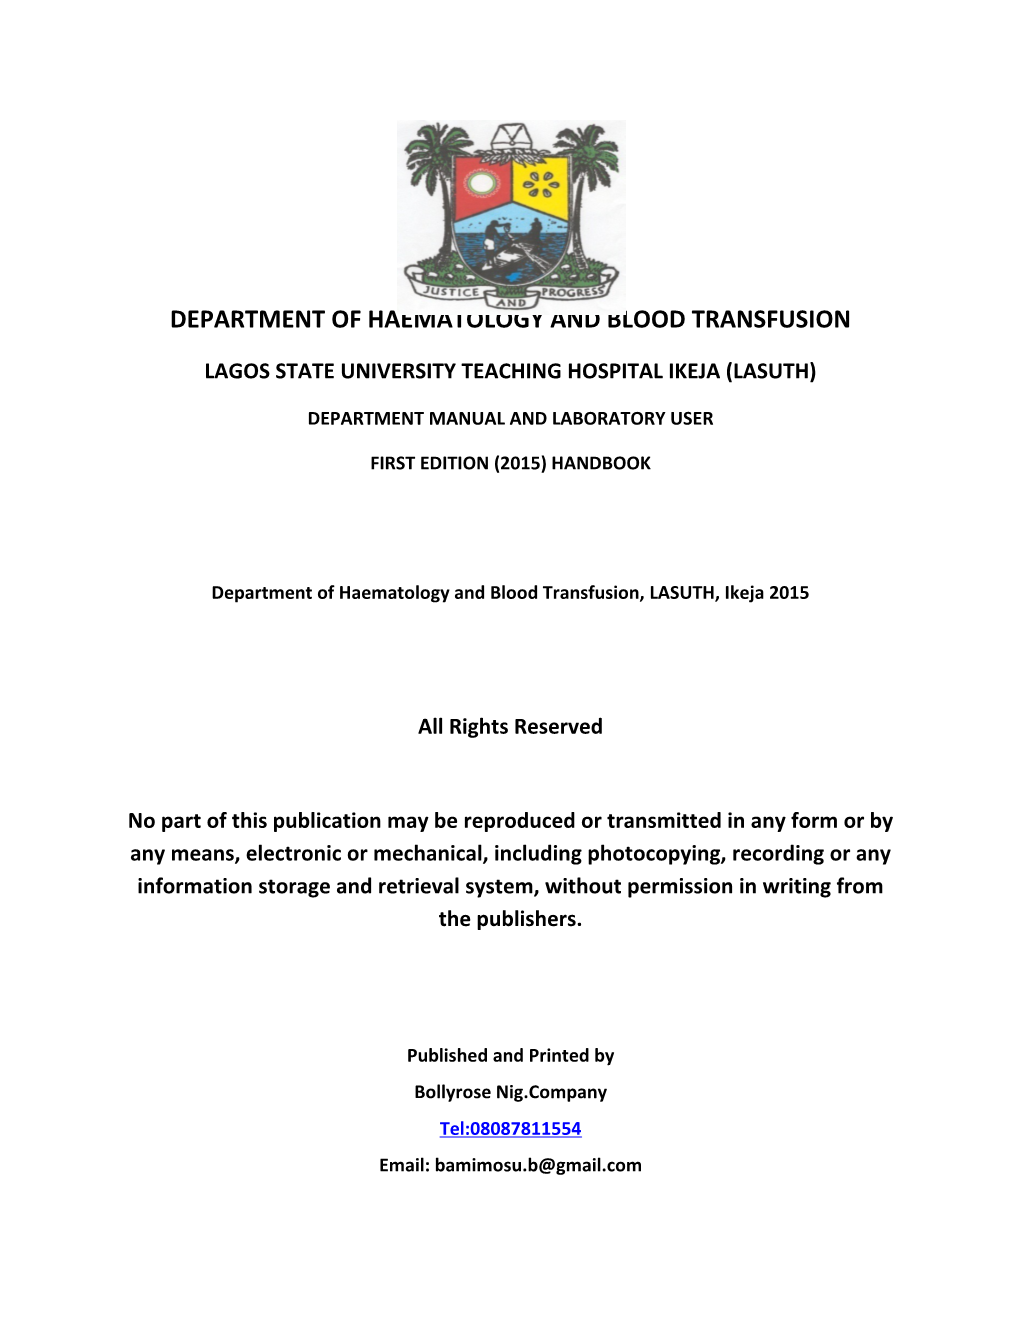 Department of Haematology and Blood Transfusion